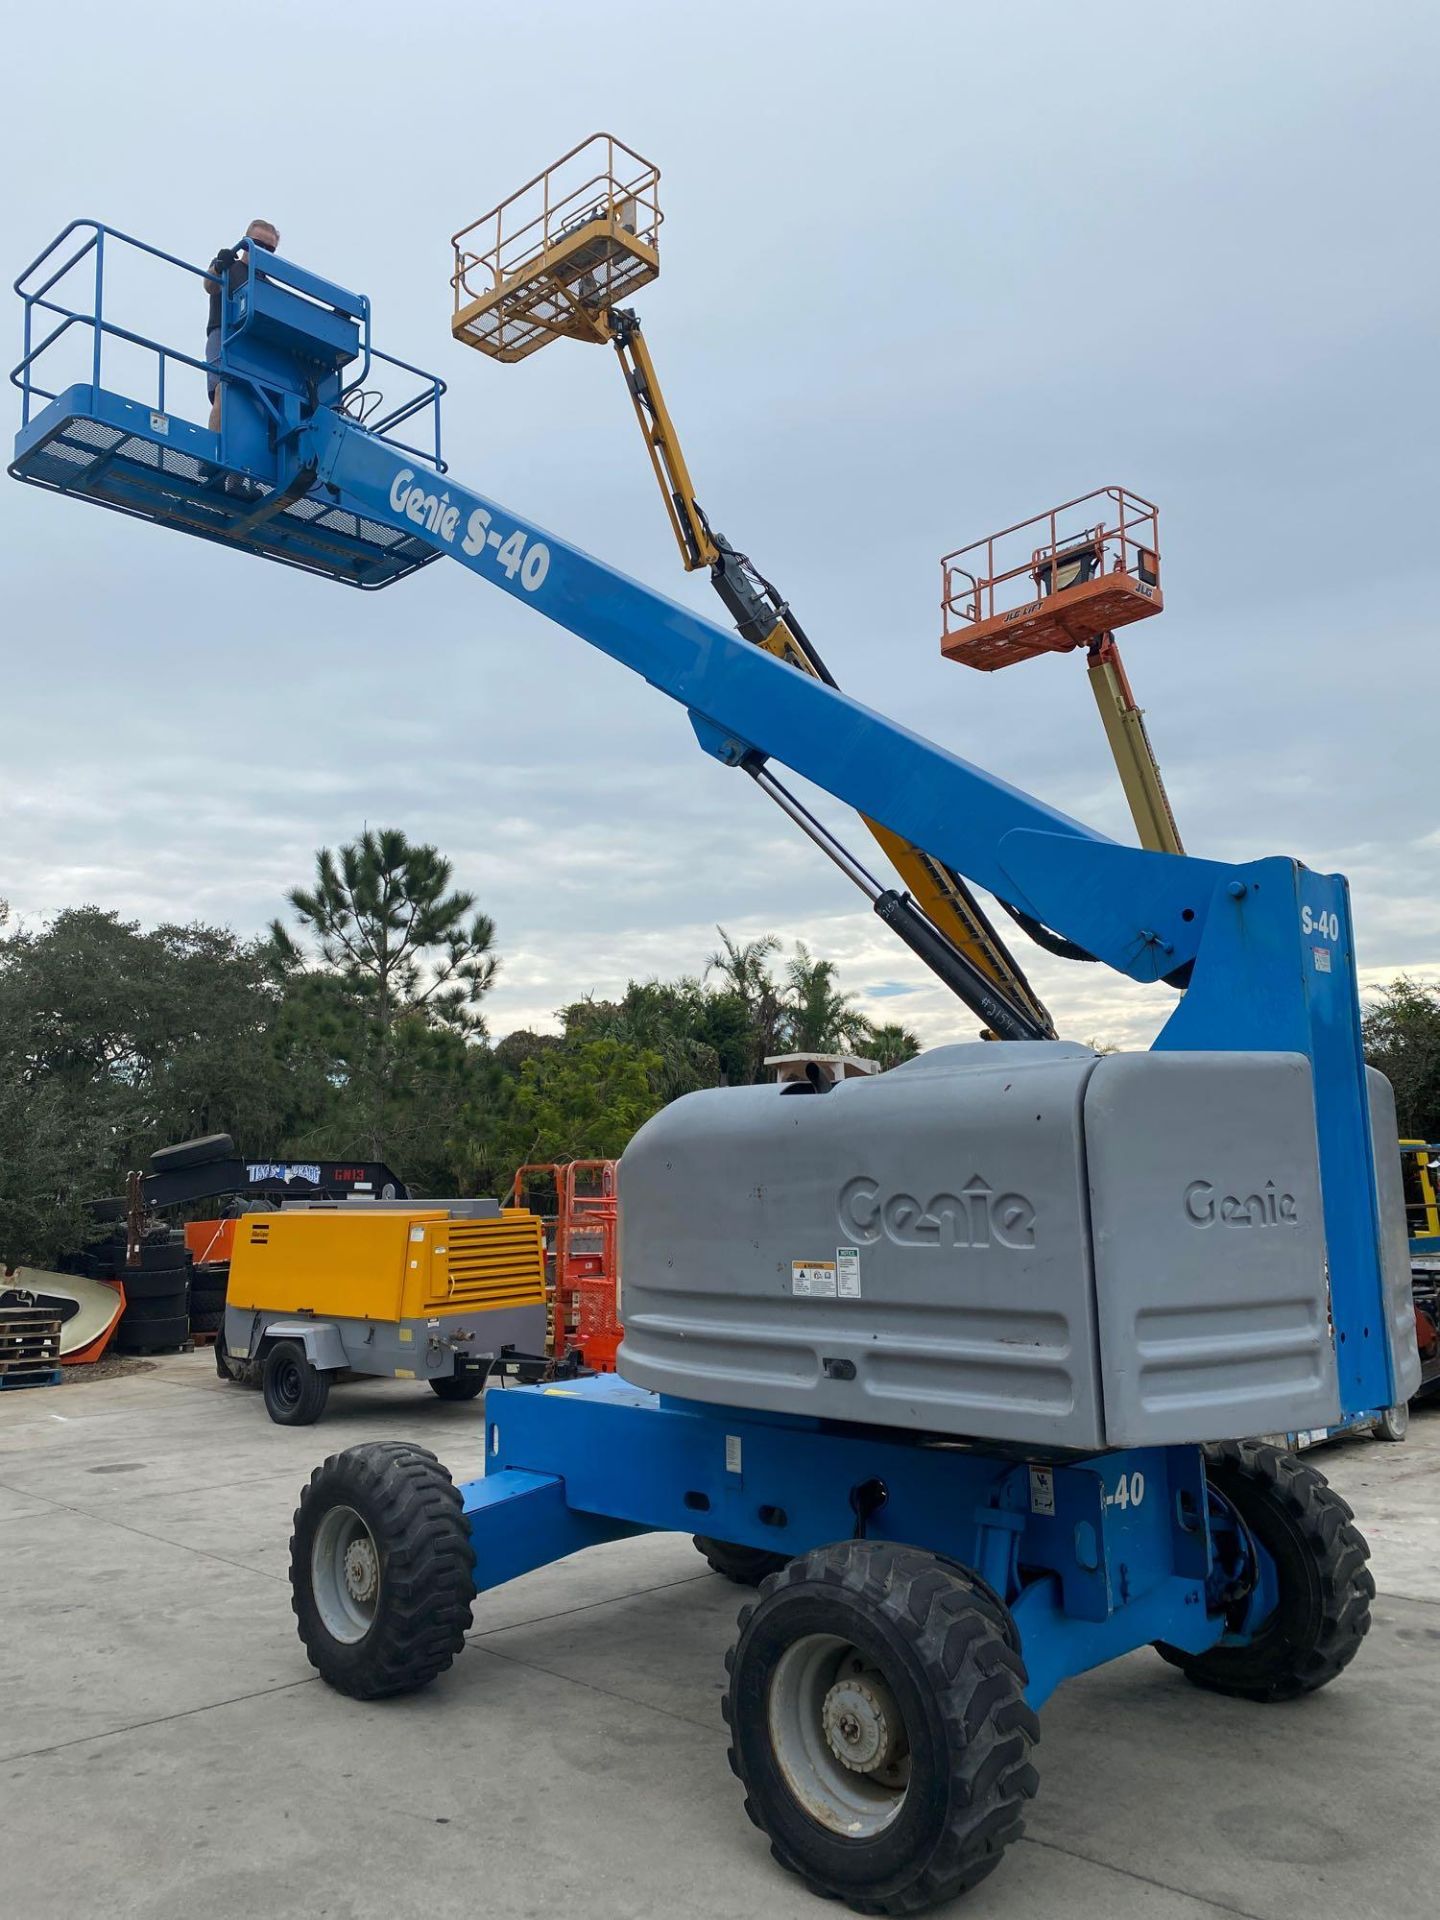 GENIE S-40 MAN LIFT, 4x4, 40’ PLATFORM HEIGHT, GAS POWERED, RUNS AND OPERATES - Image 9 of 9